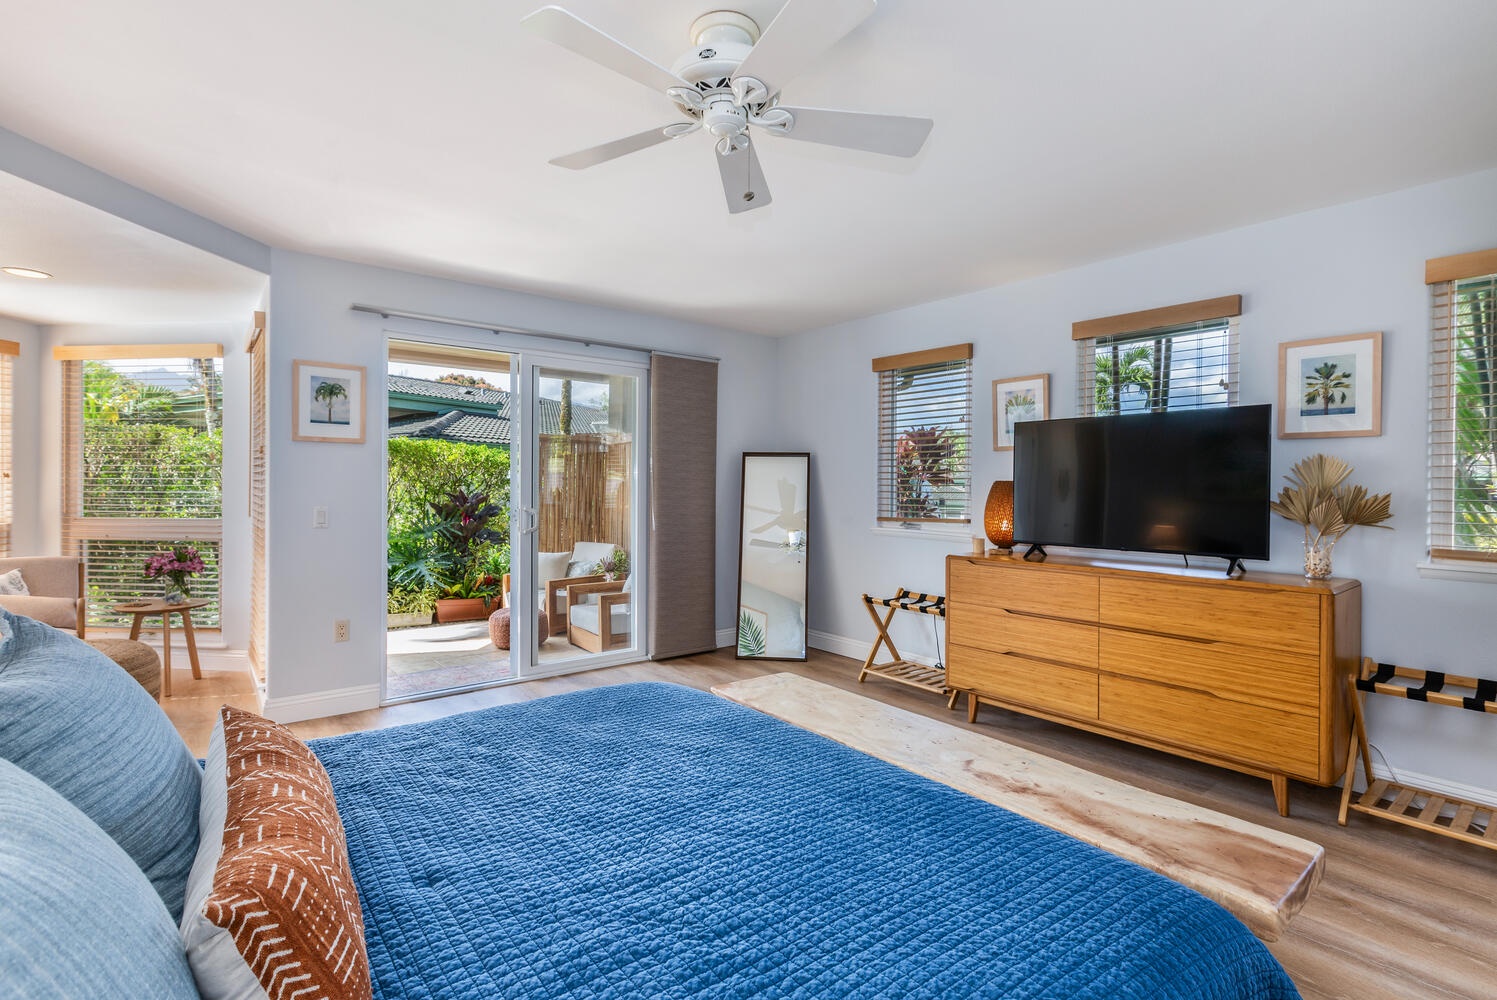 Princeville Vacation Rentals, Sea Glass - Also equipped with a smart TV and a dresser.